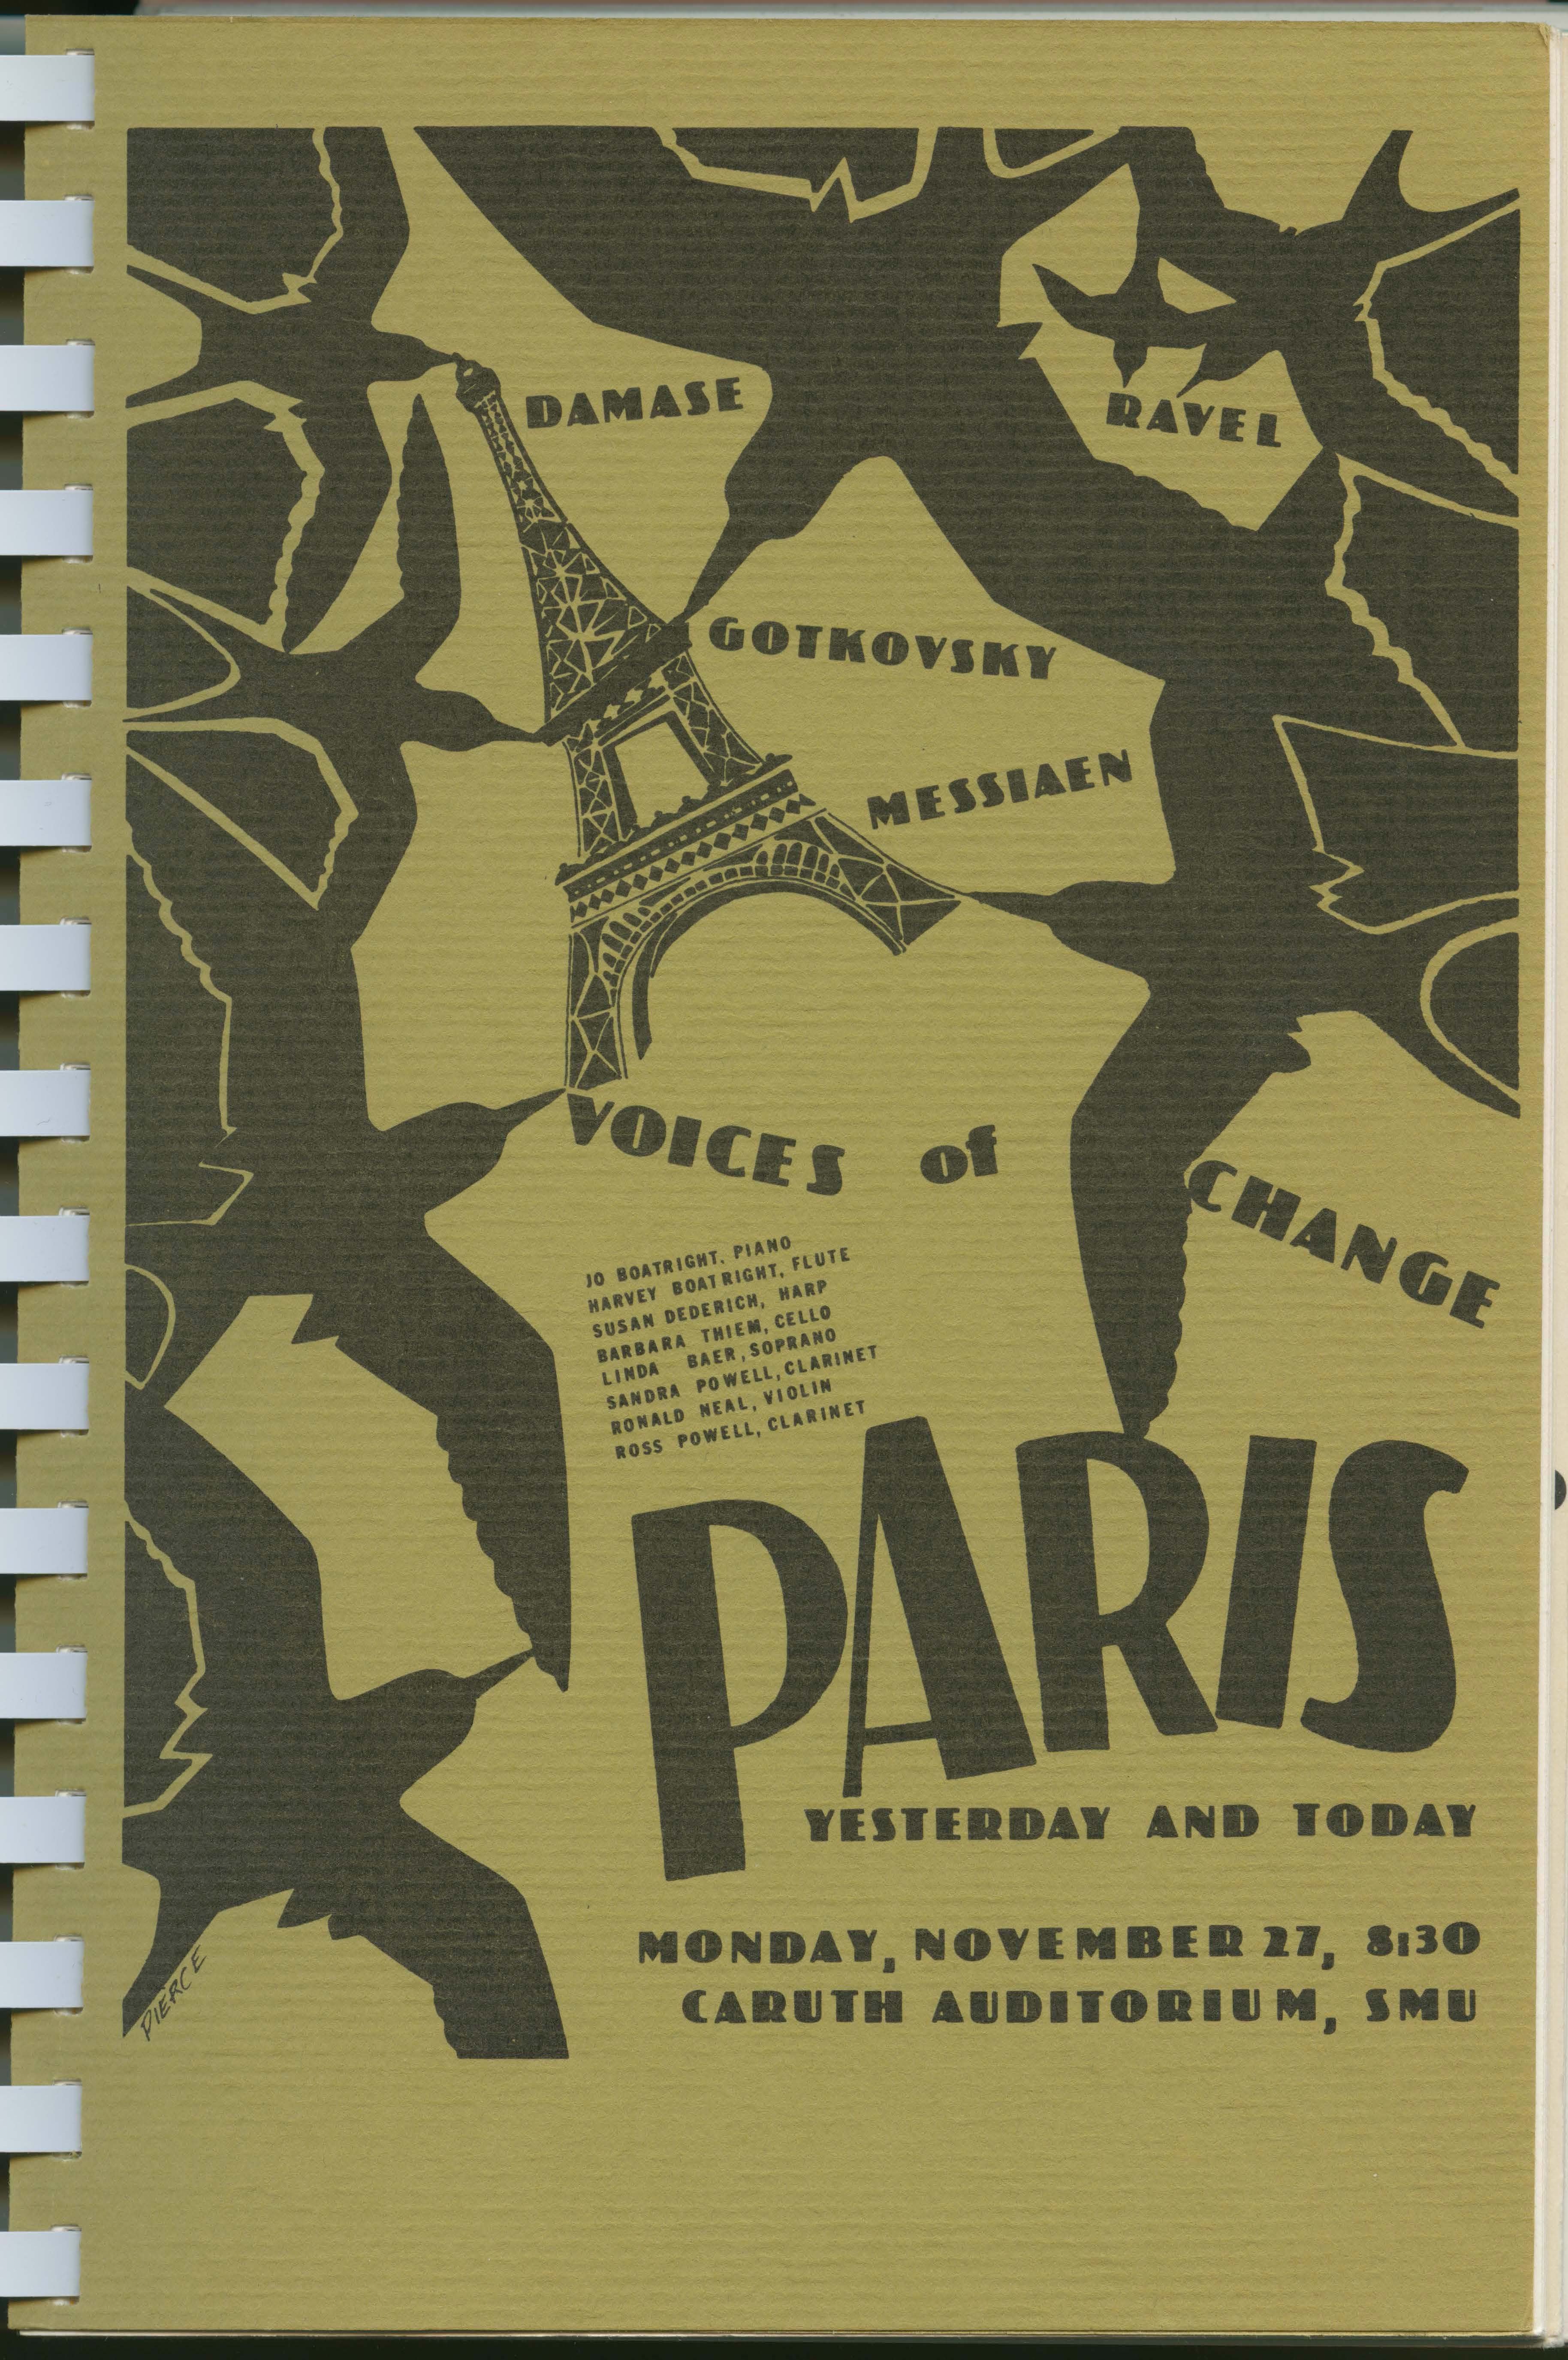 title="Paris: Yesterday and Today : November 27, 1978 program"